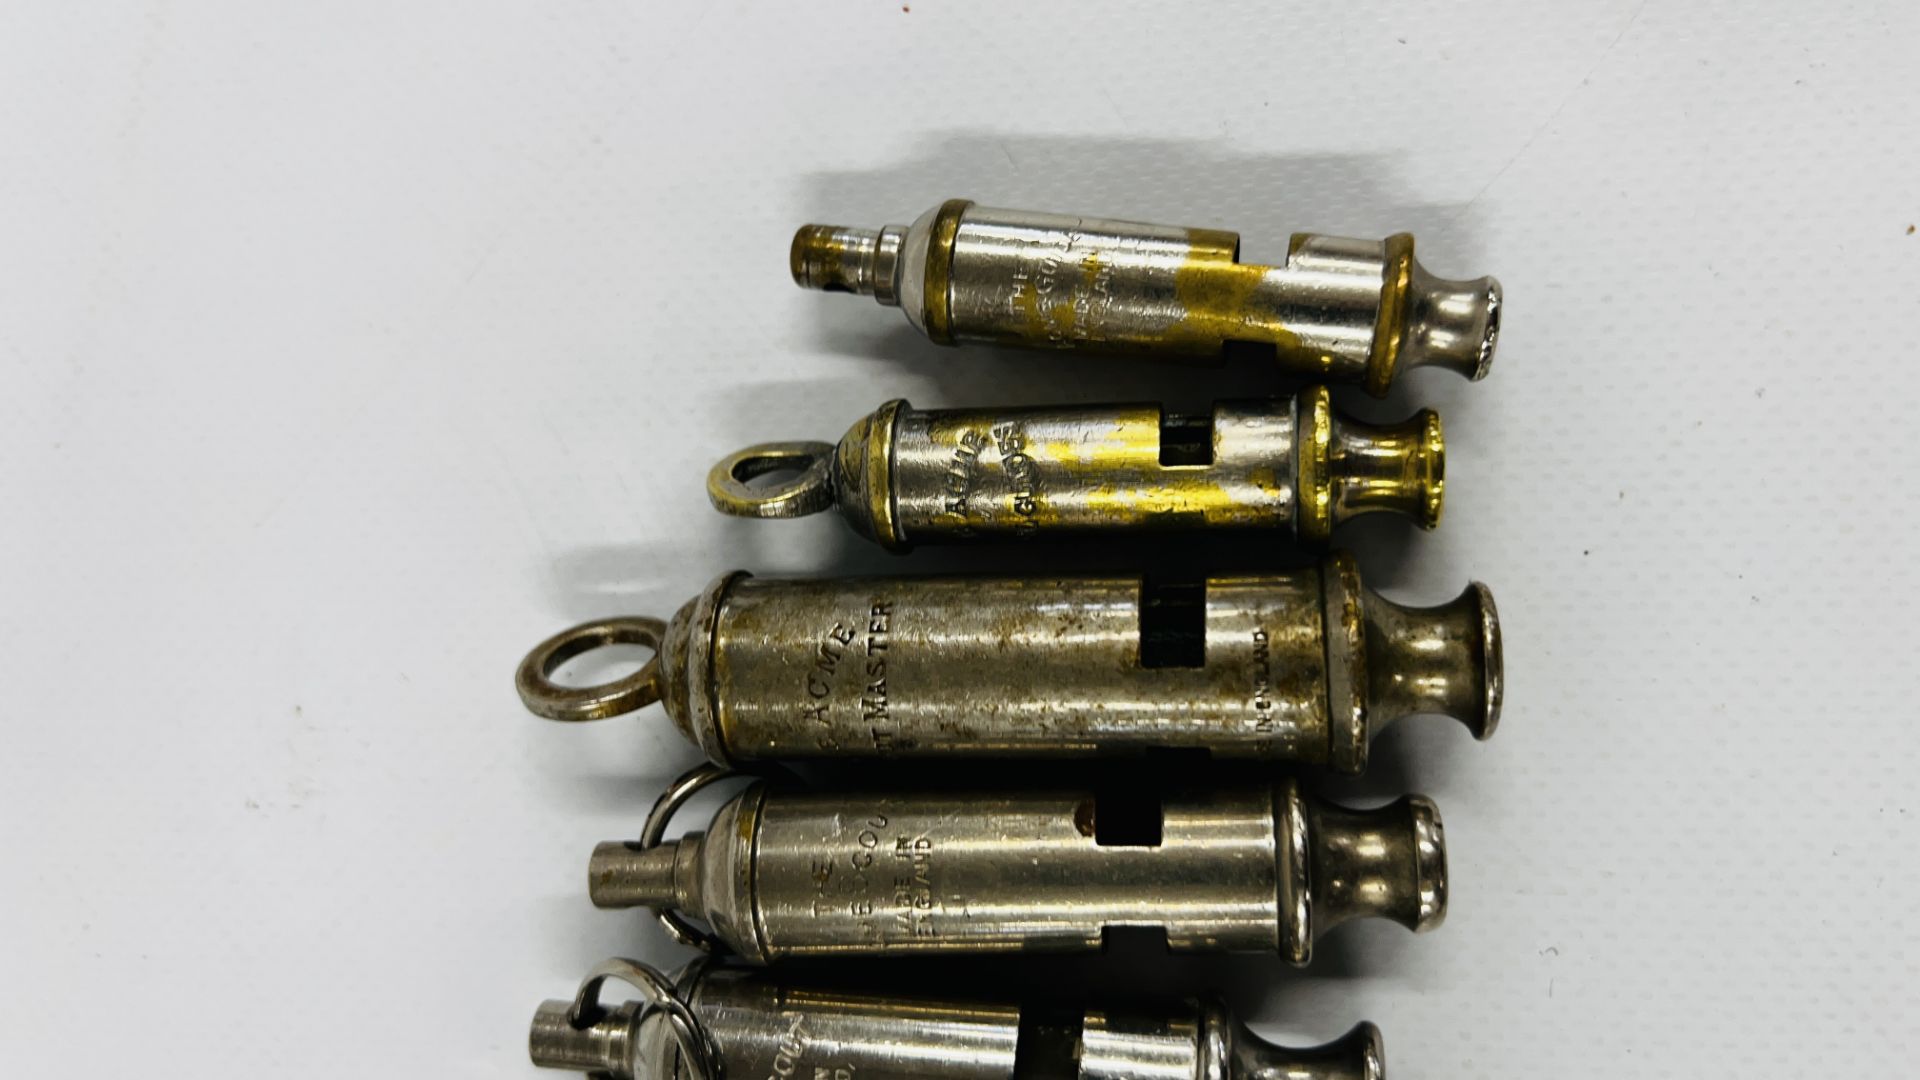 A COLLECTION OF 13 ASSORTED VINTAGE "ACME" WHISTLES, BOY SCOUTS & GIRL GUIDES. - Image 2 of 5